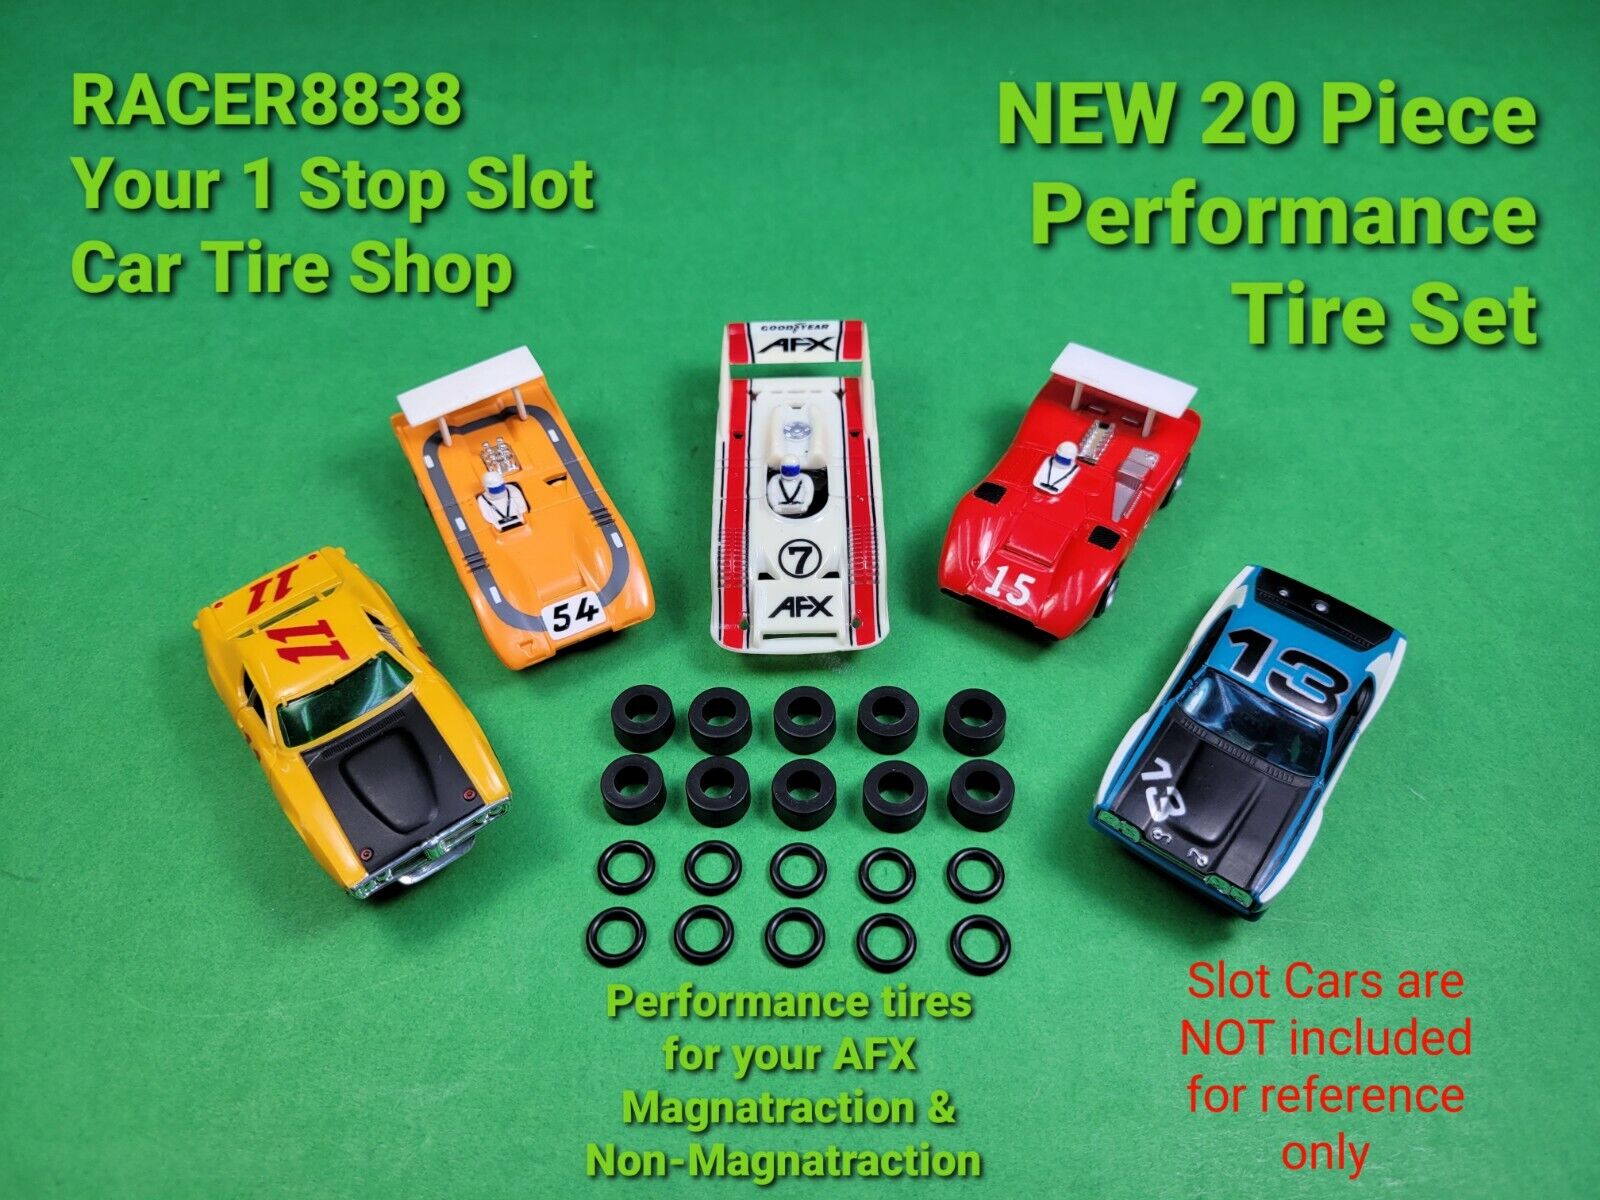 AFX AURORA MAG & NON-Mag 20 NEW TIRES front O-RINGS & REAR SILICONES HO Slot Car